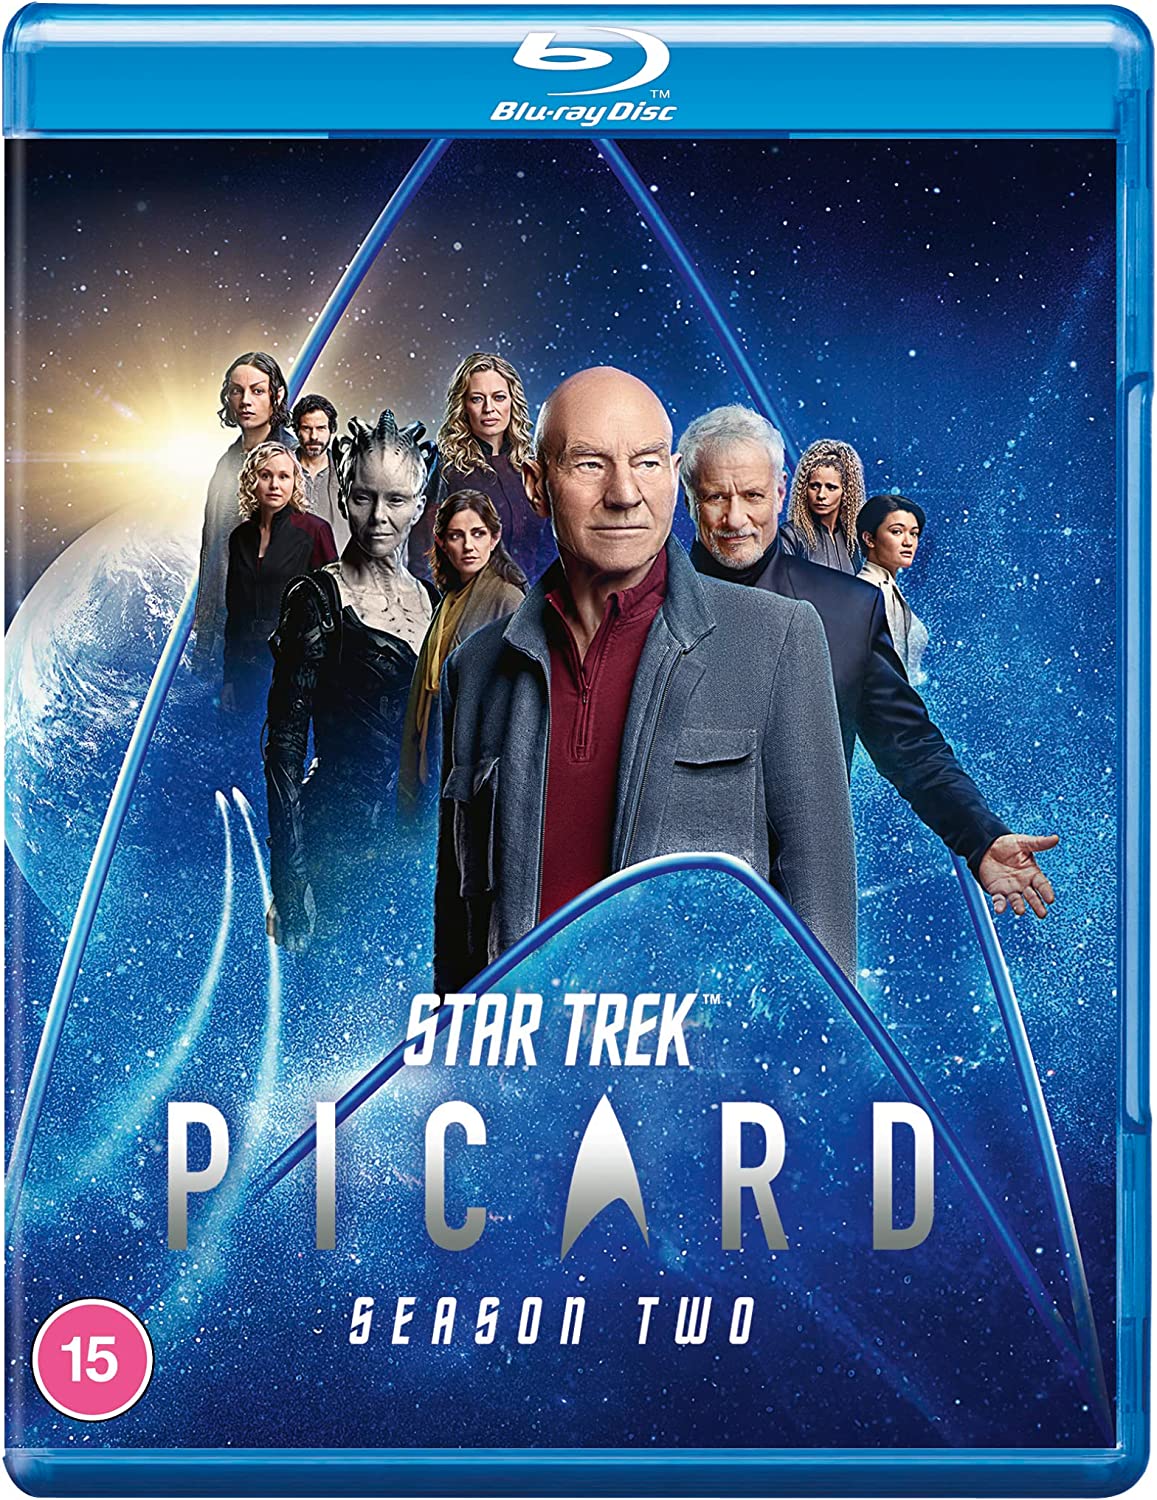 boom competitions -  win Picard Season Two on Blu-ray